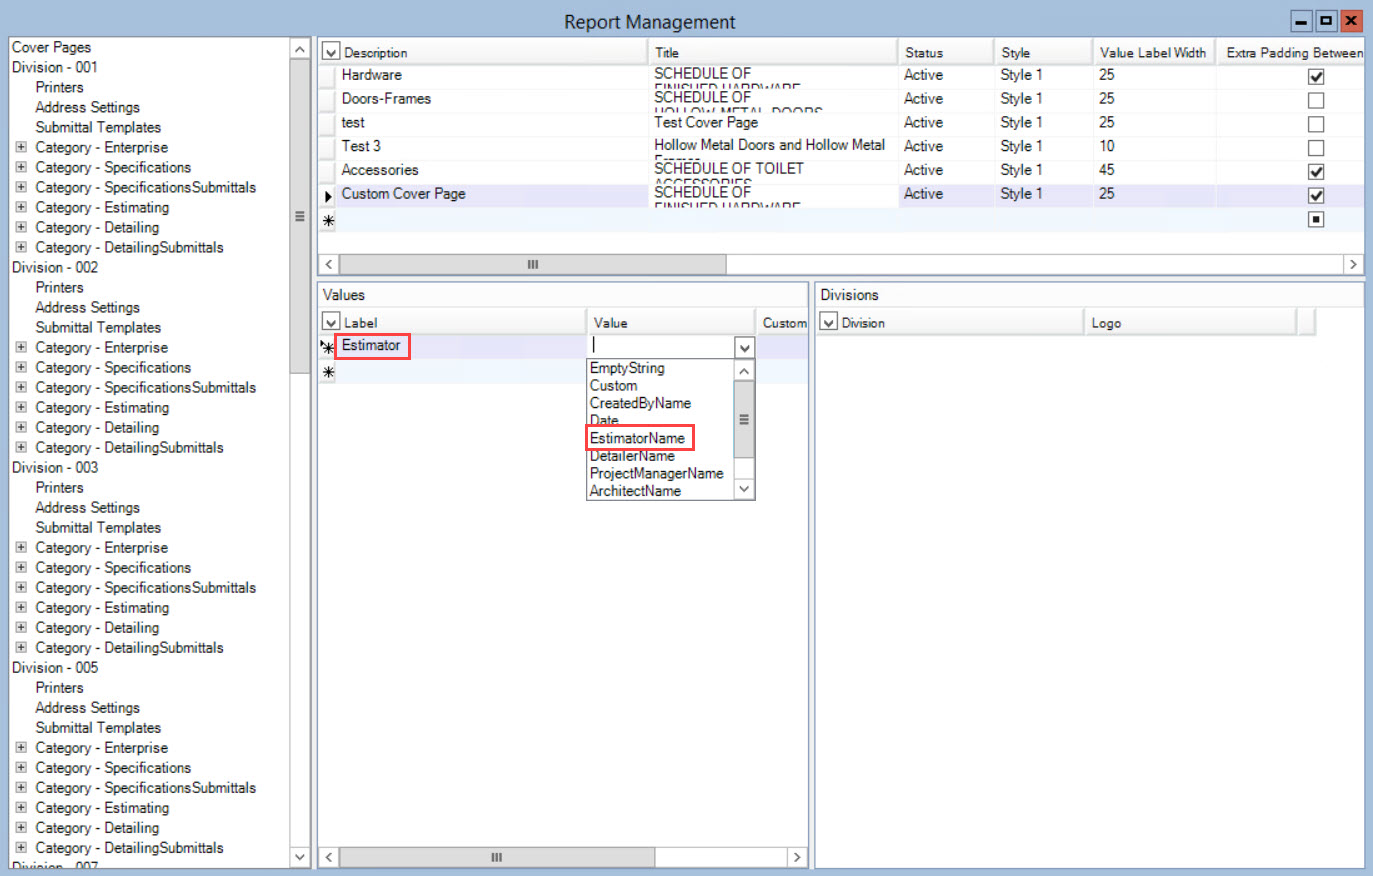 Report Management window, Values pane; shows the location of the Label and Value field with the example label 'Estimator' and the example value 'EstimatorName'.